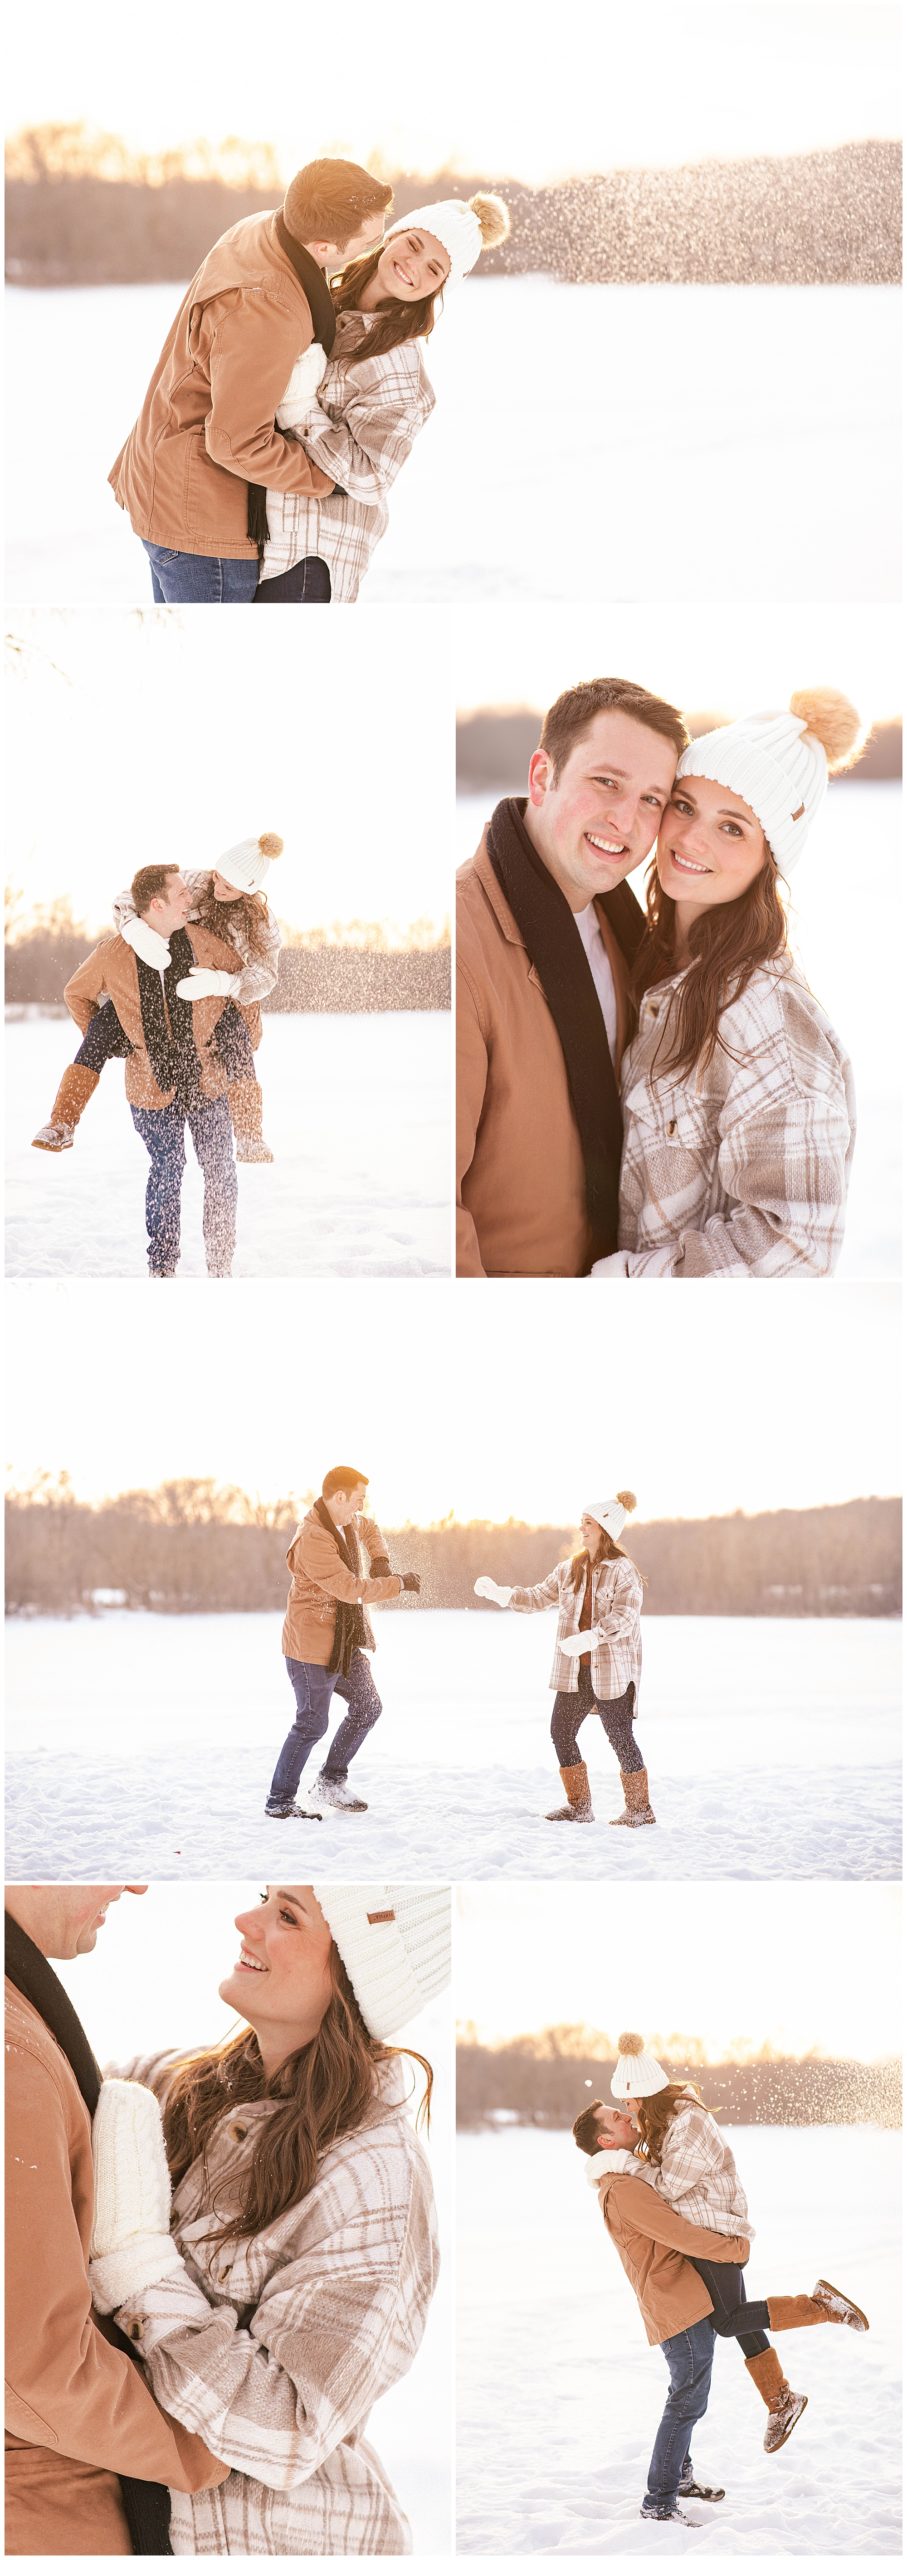 couples winter photoshoot with snow and cozy flannel